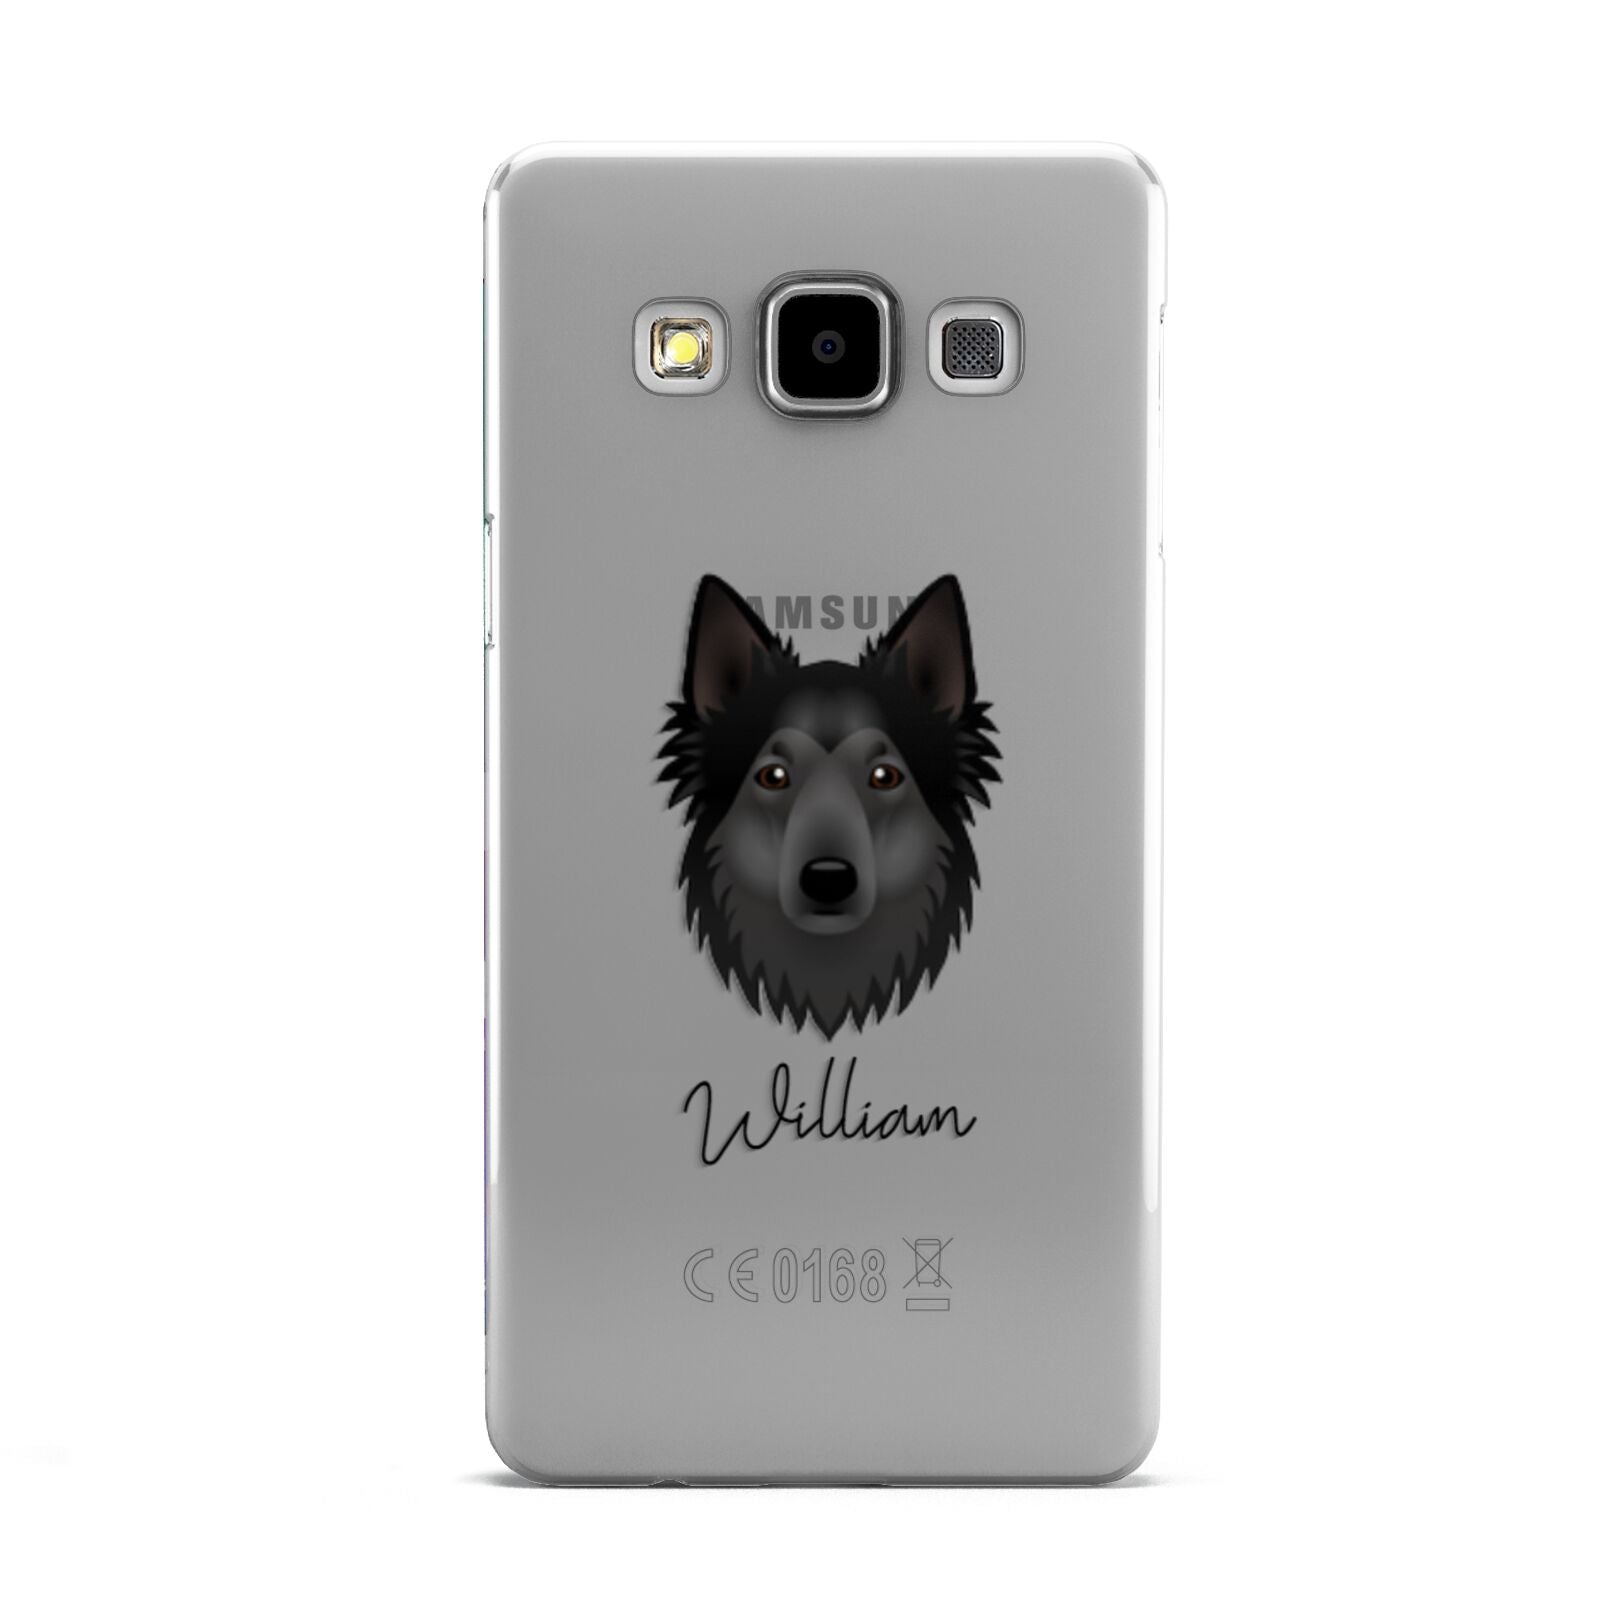 Shollie Personalised Samsung Galaxy A5 Case